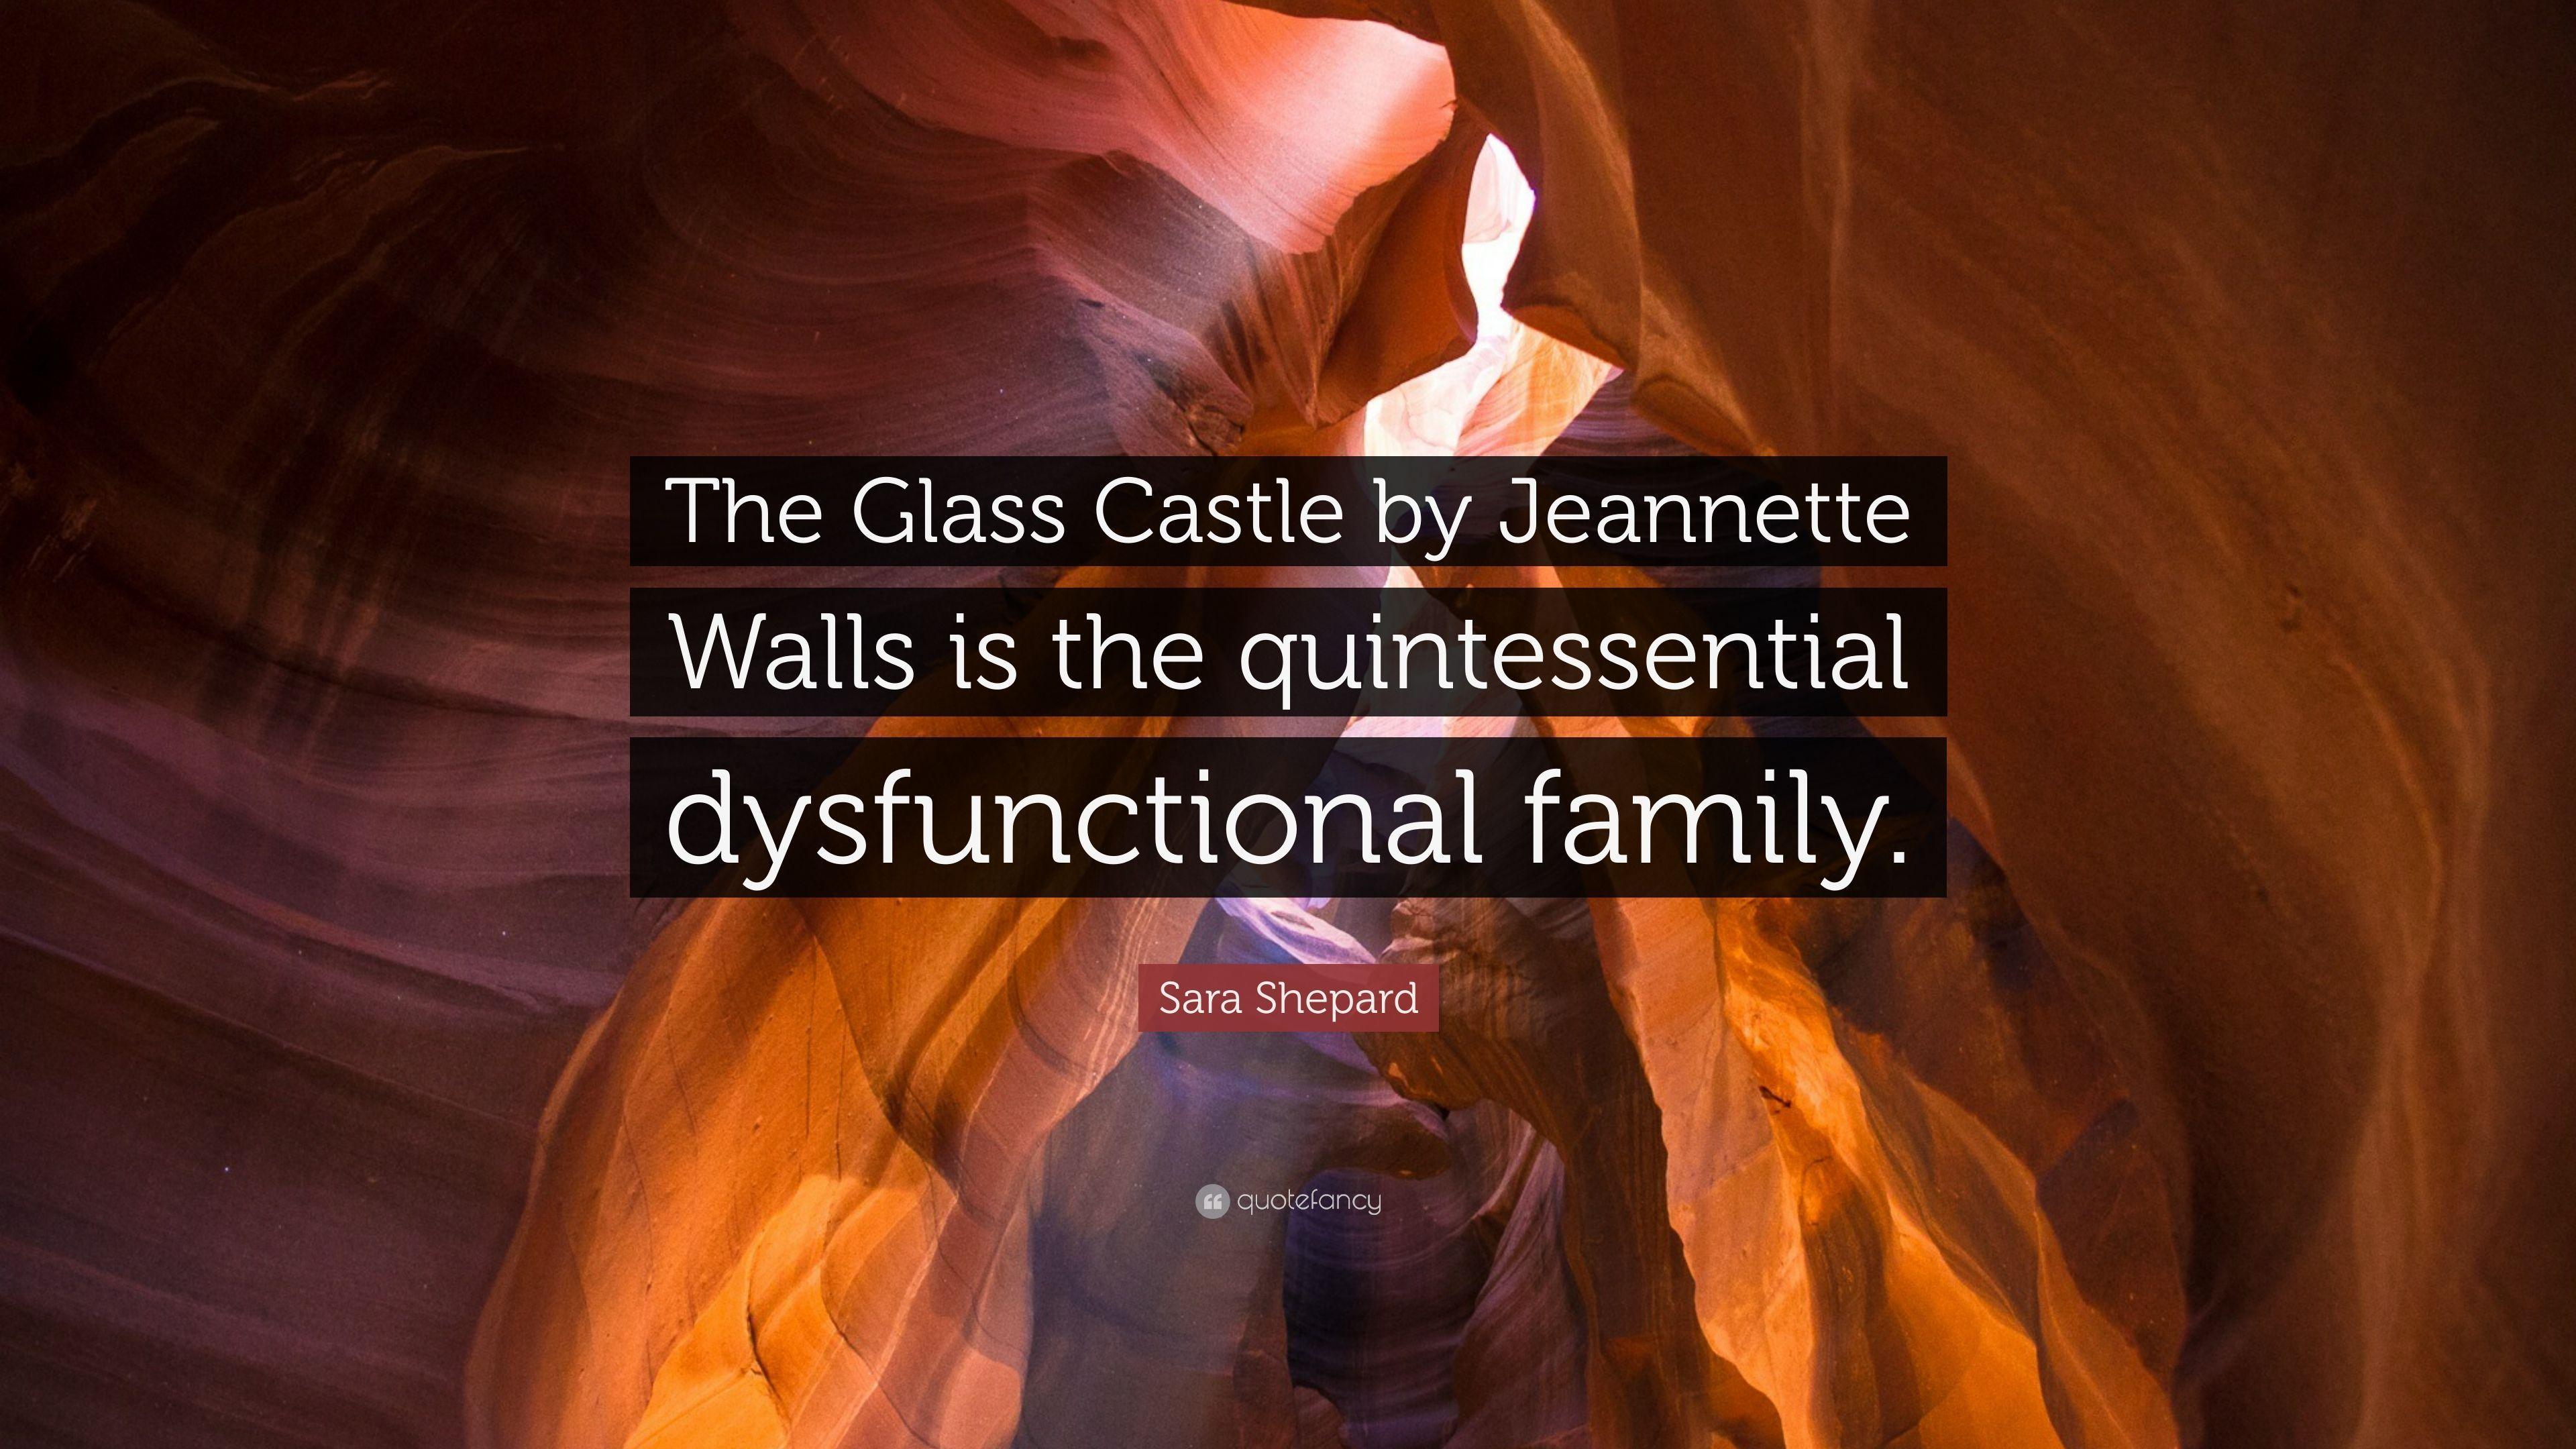 Sara Shepard Quote: “The Glass Castle by Jeannette Walls is